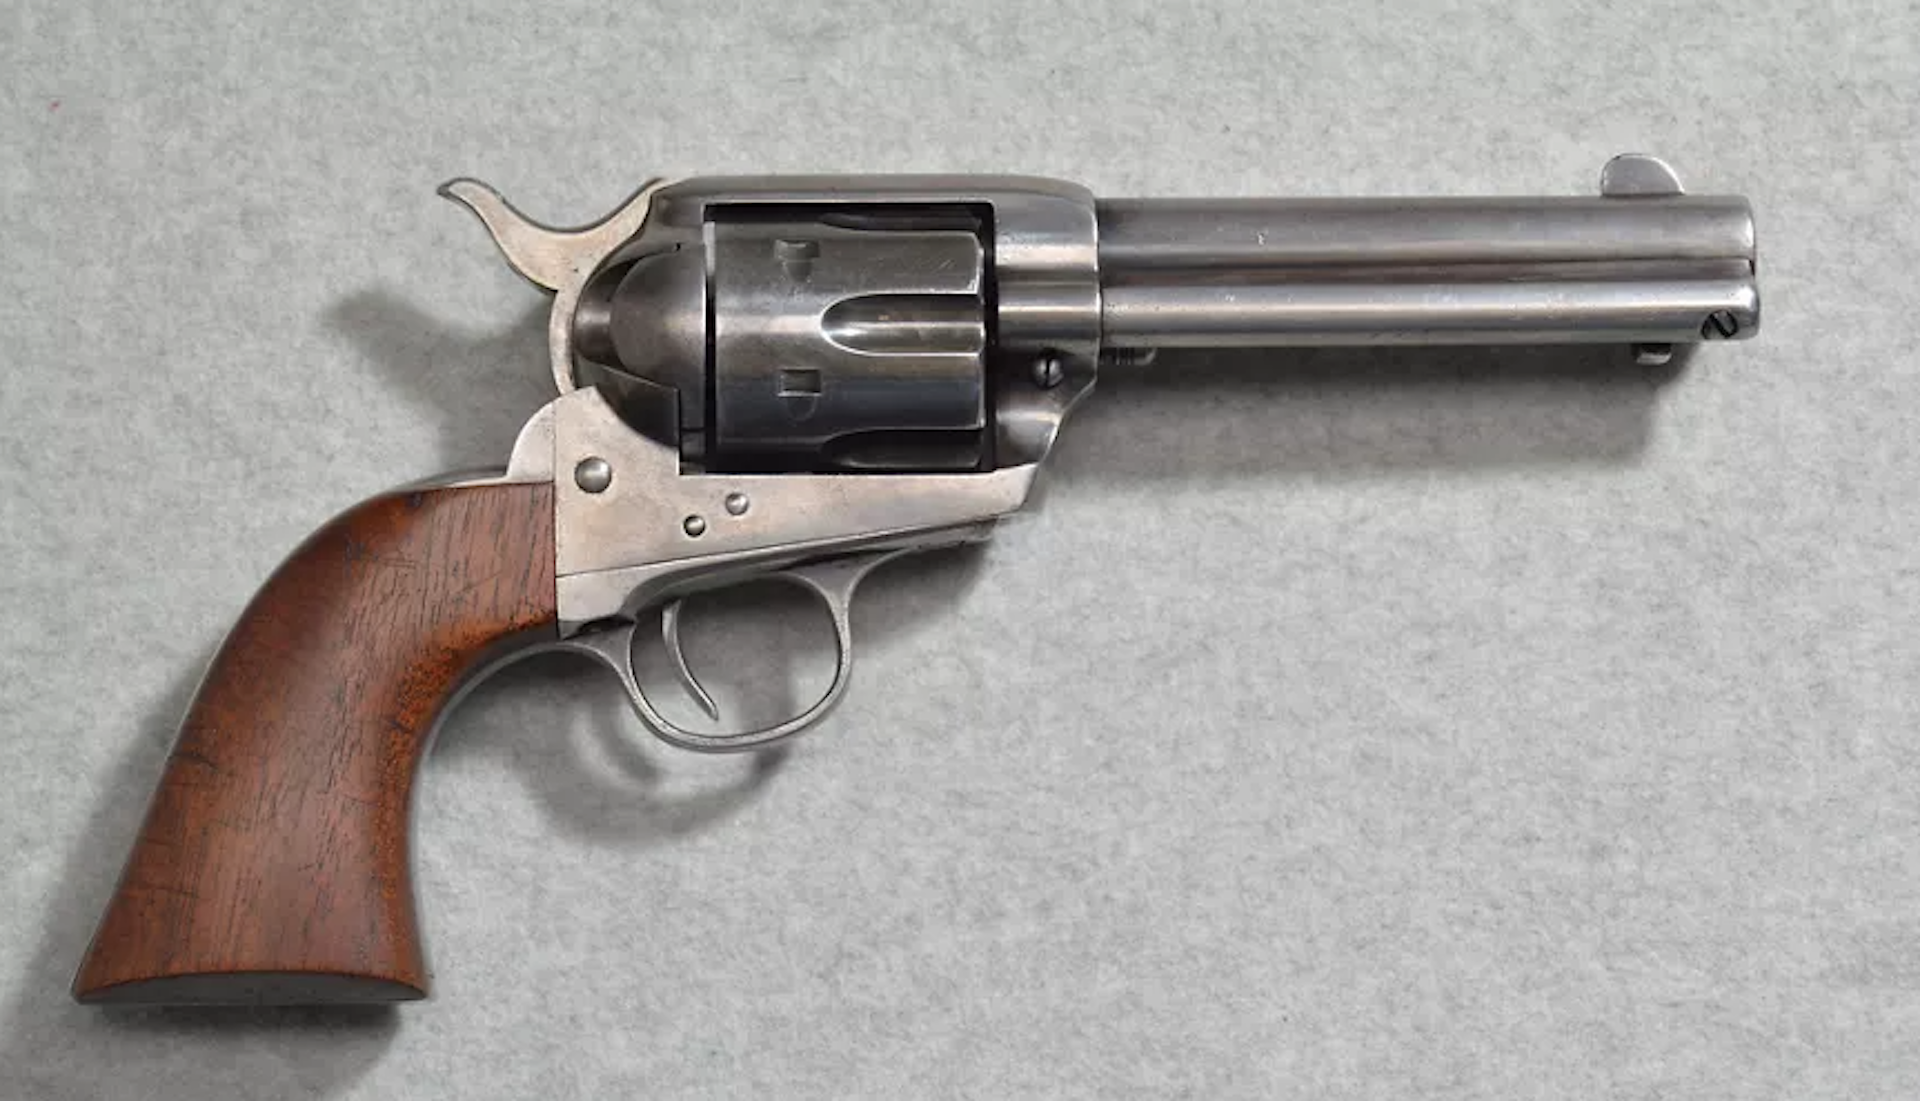 A revolver with a wooden butt